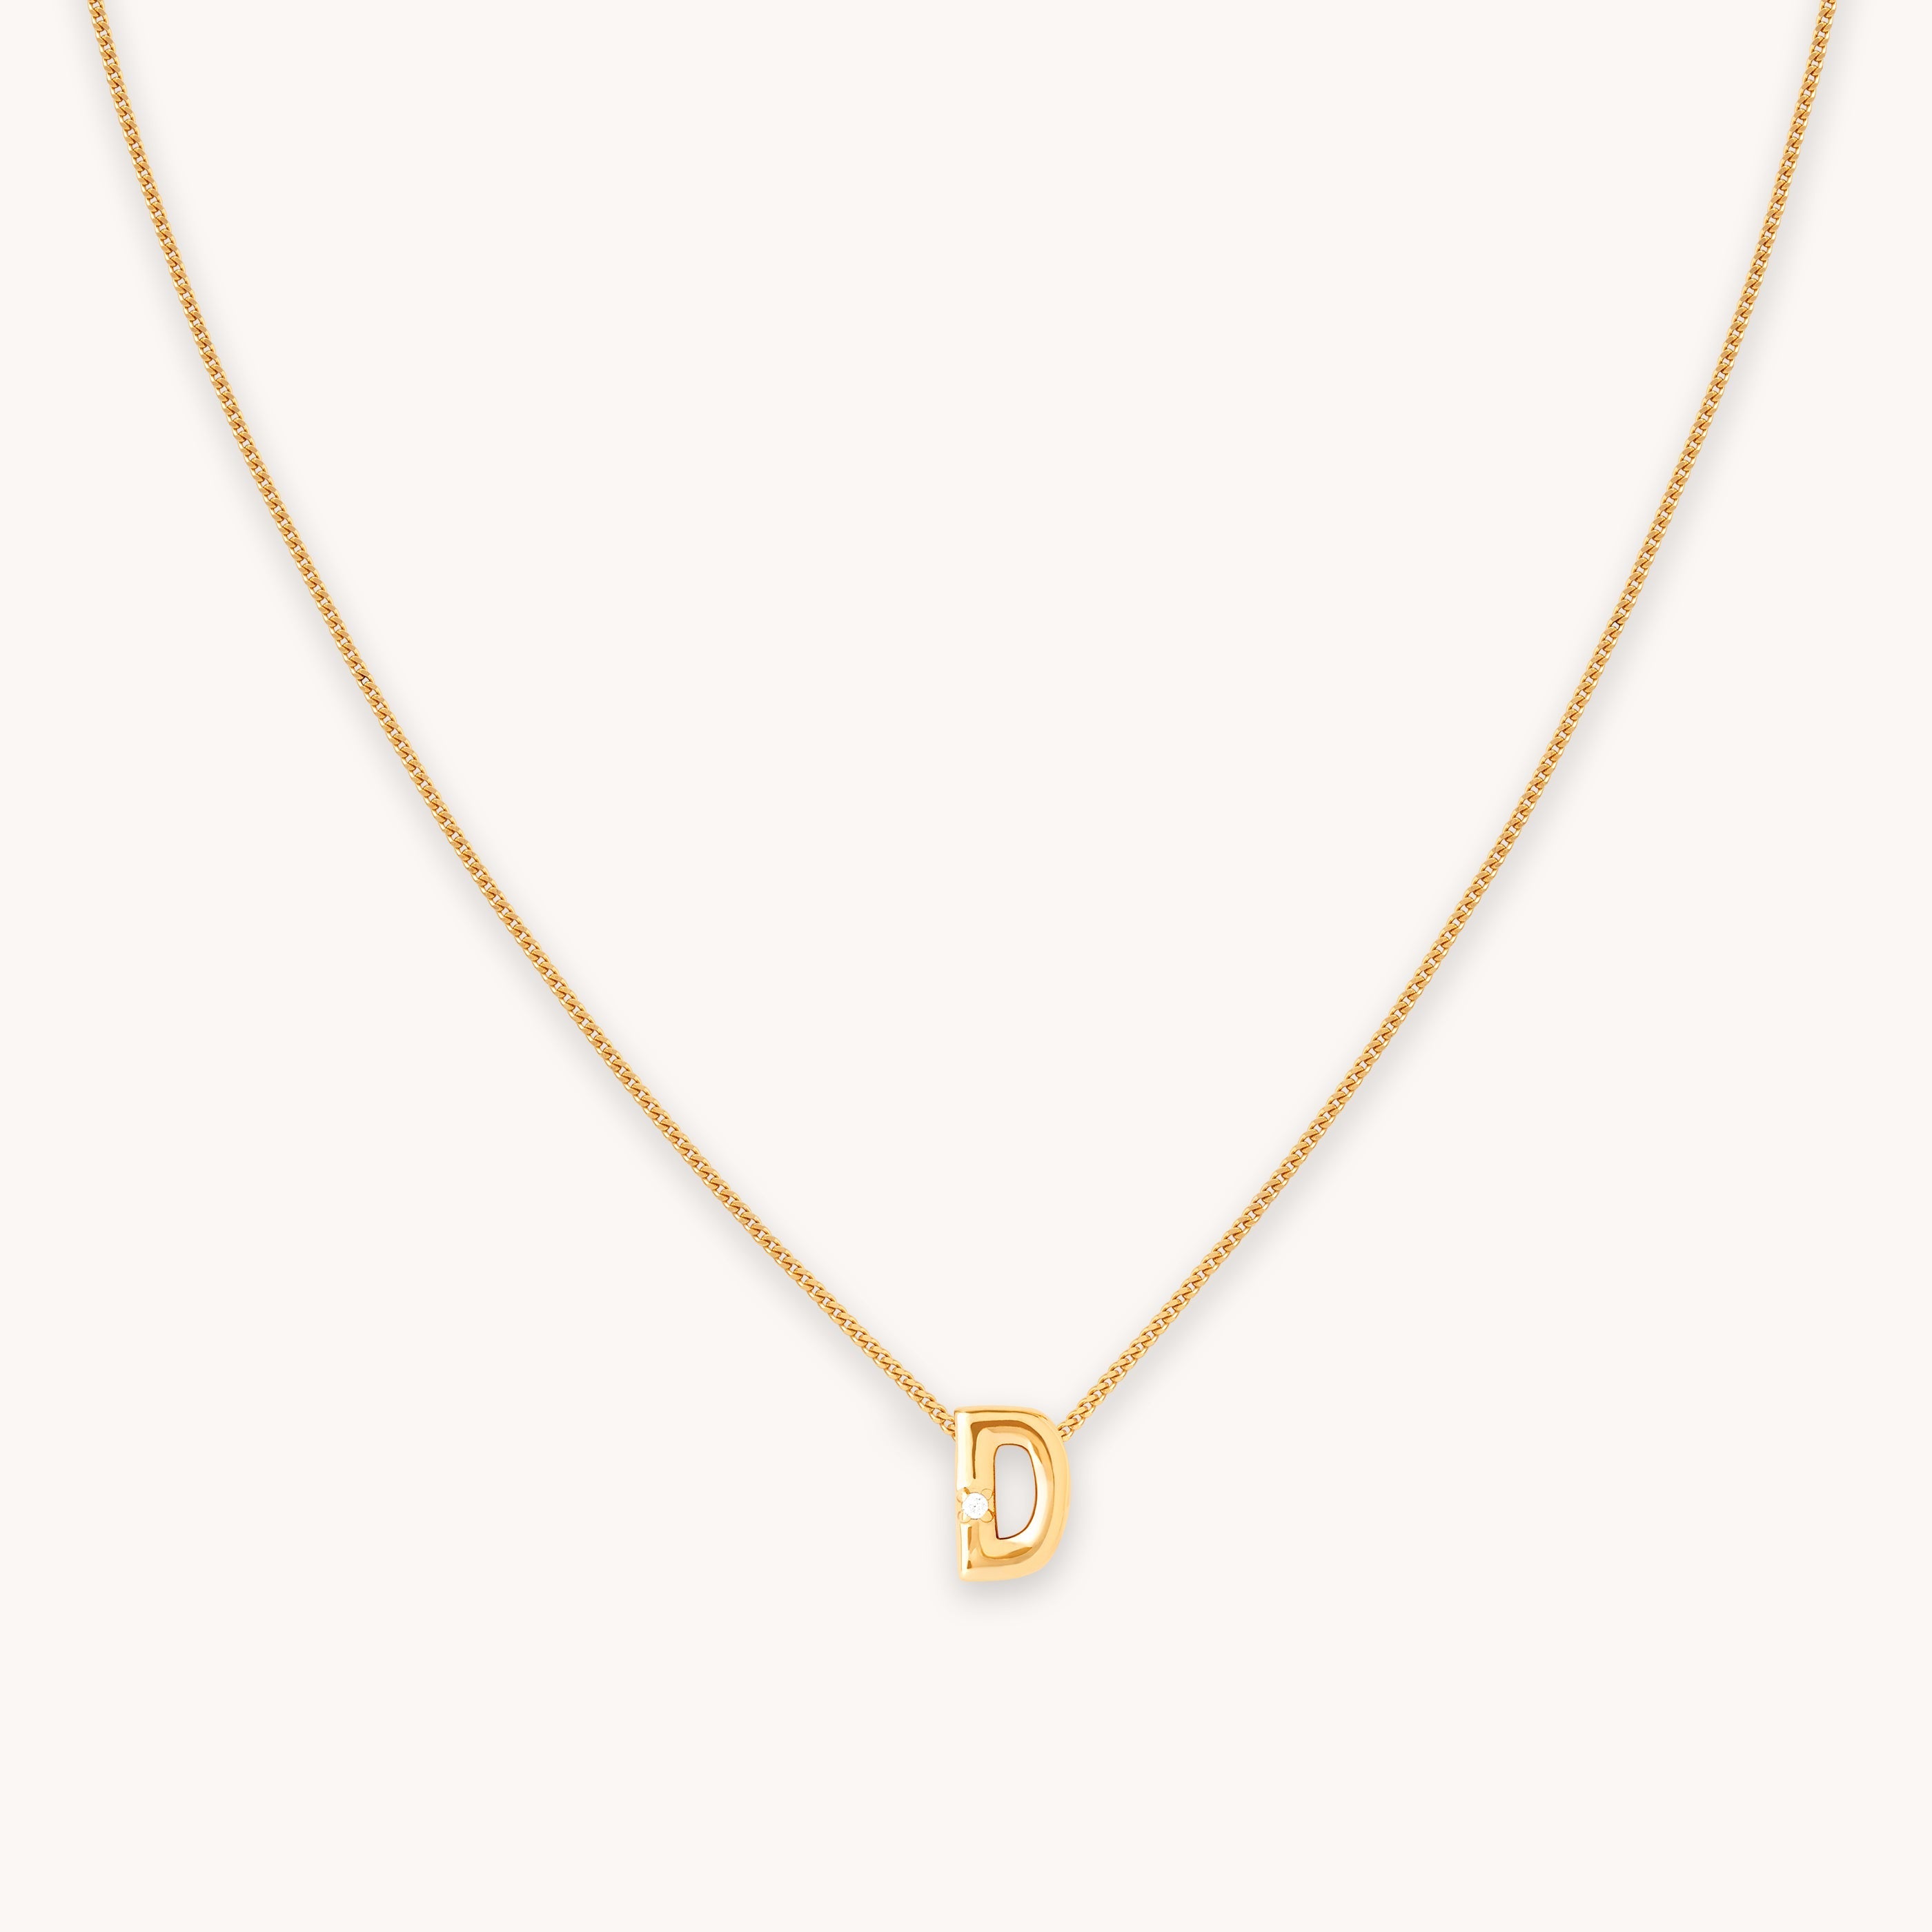 D Initial Pendant Necklace in Gold